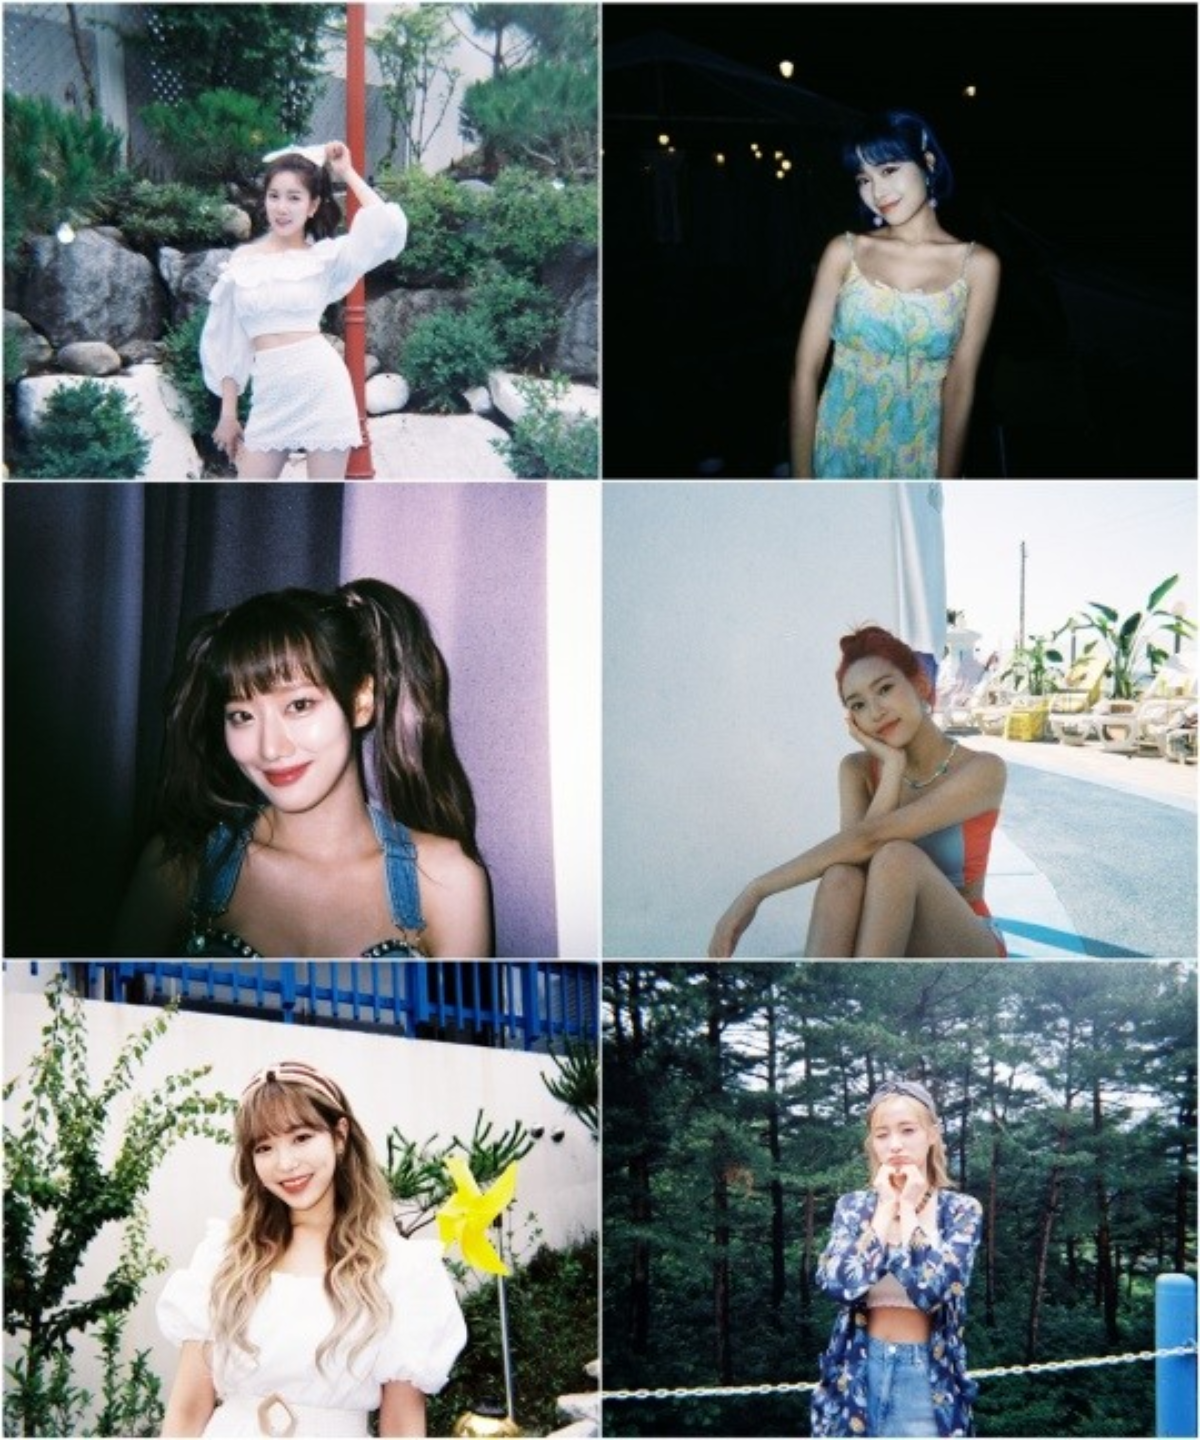 April, release photos of each member of 'Summer in April'